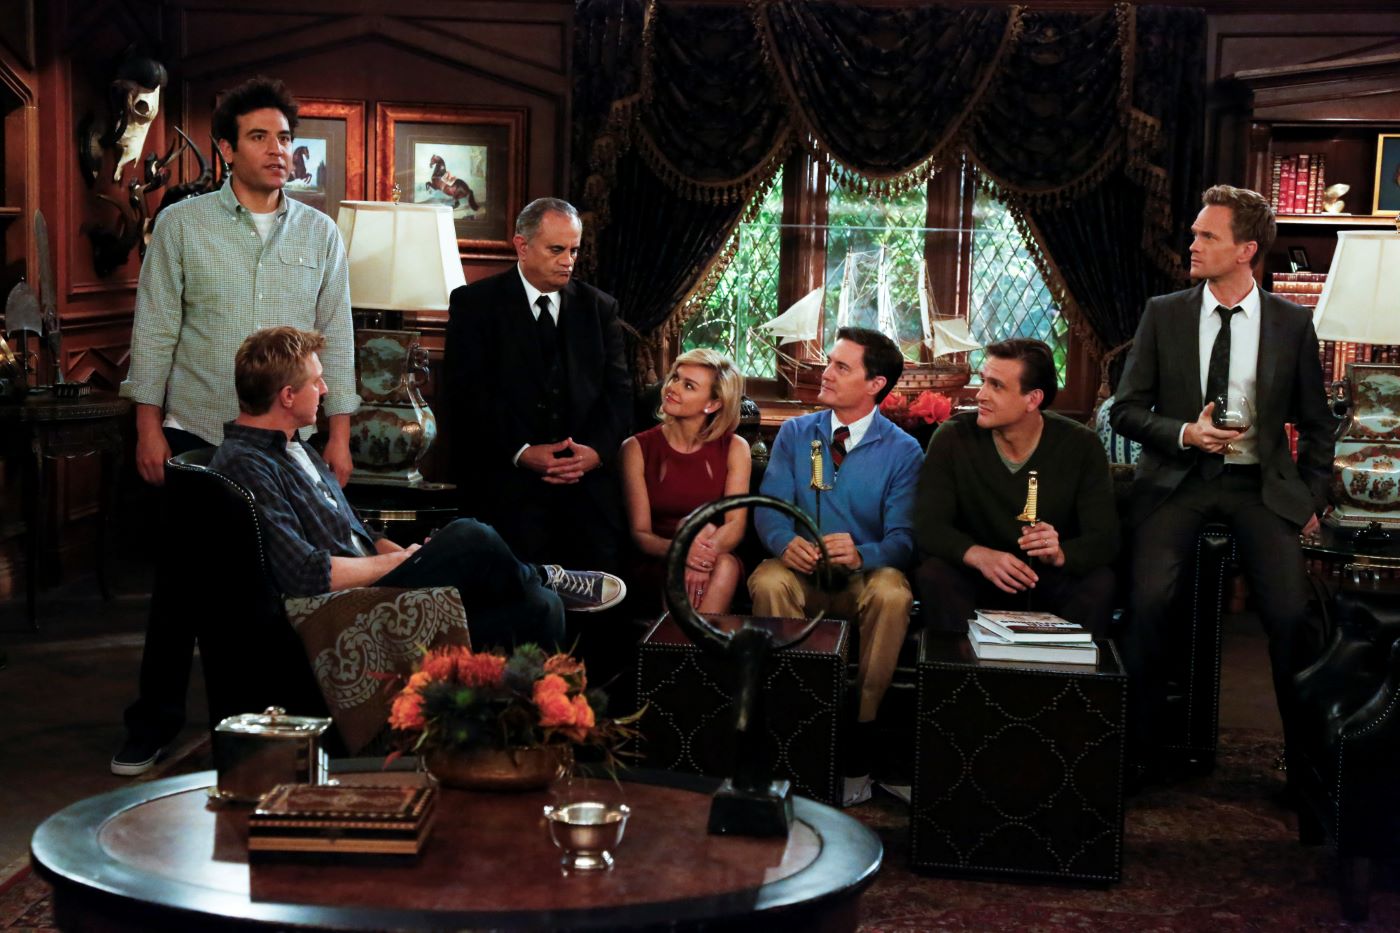 'How I Met Your Mother' scene and cast in a room with wood walls.